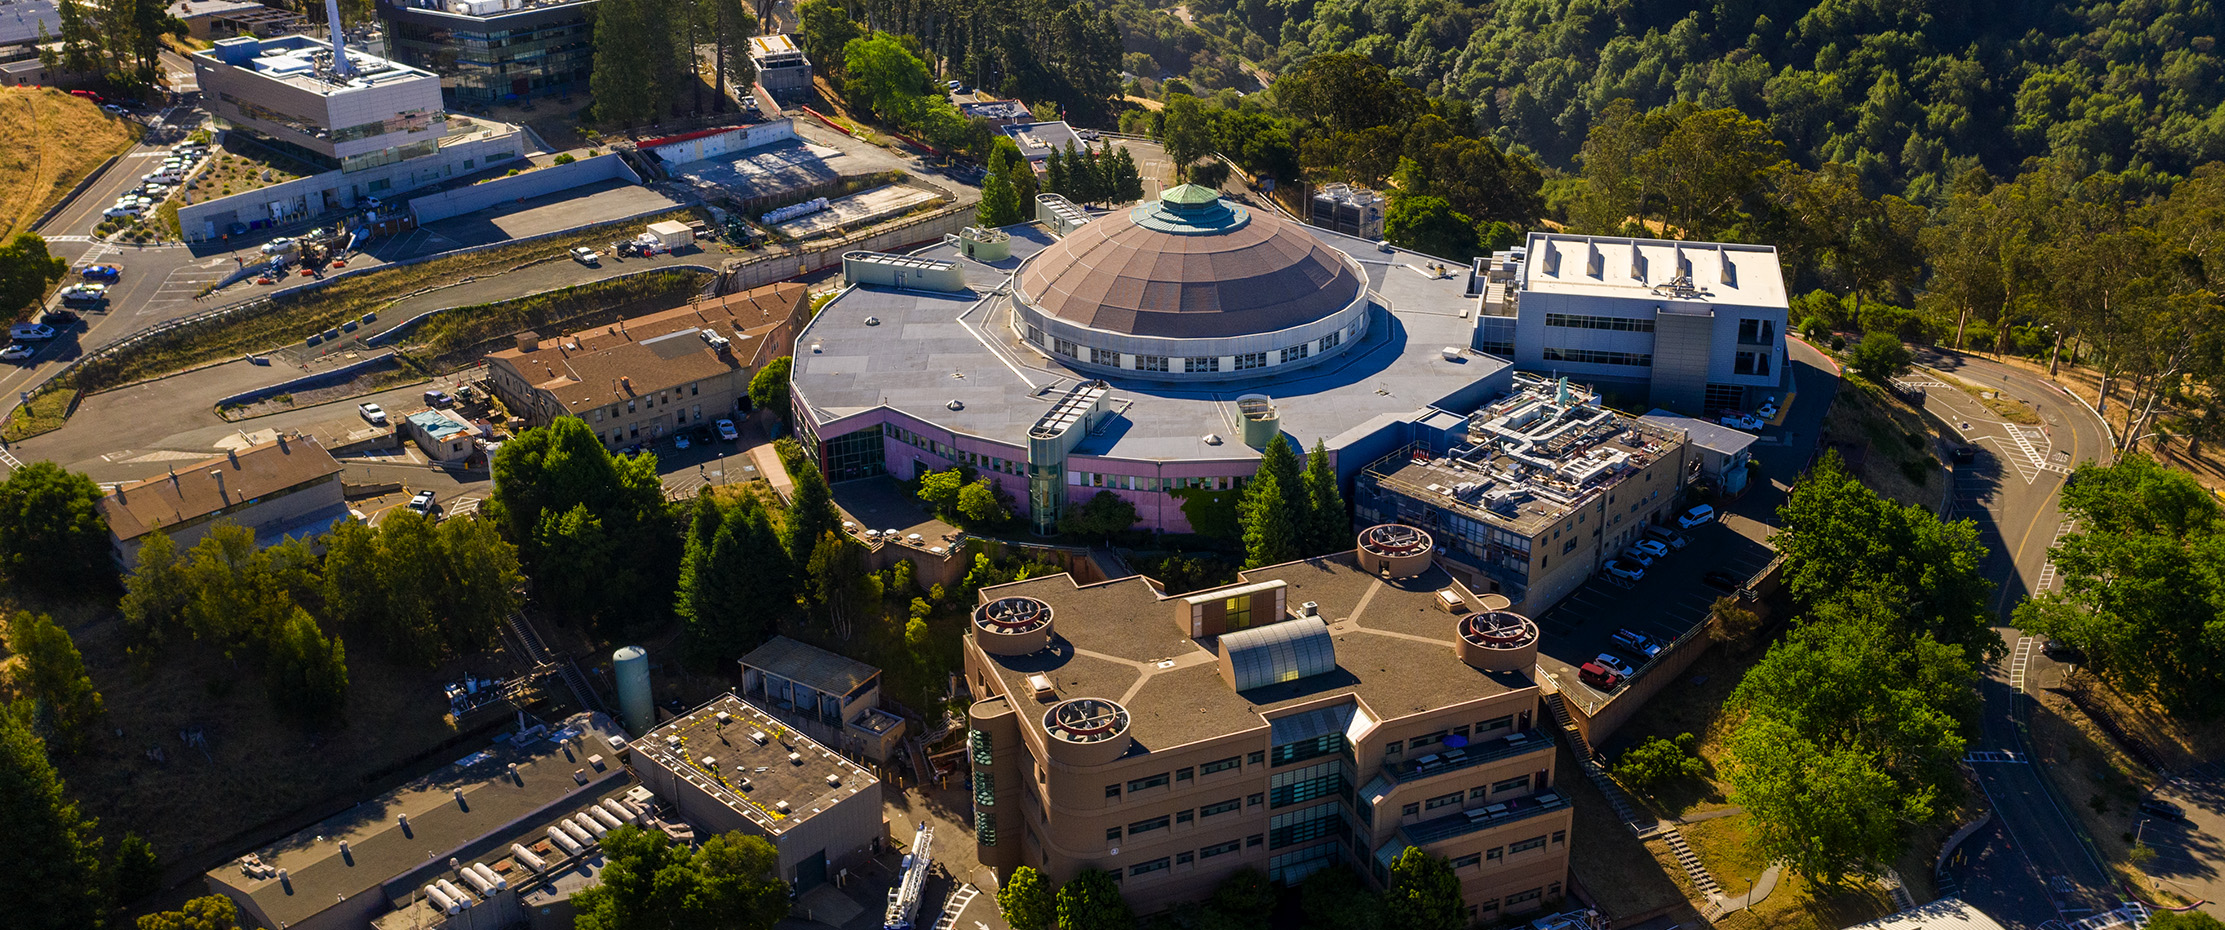 Aerial view of the Advanced Light Source building